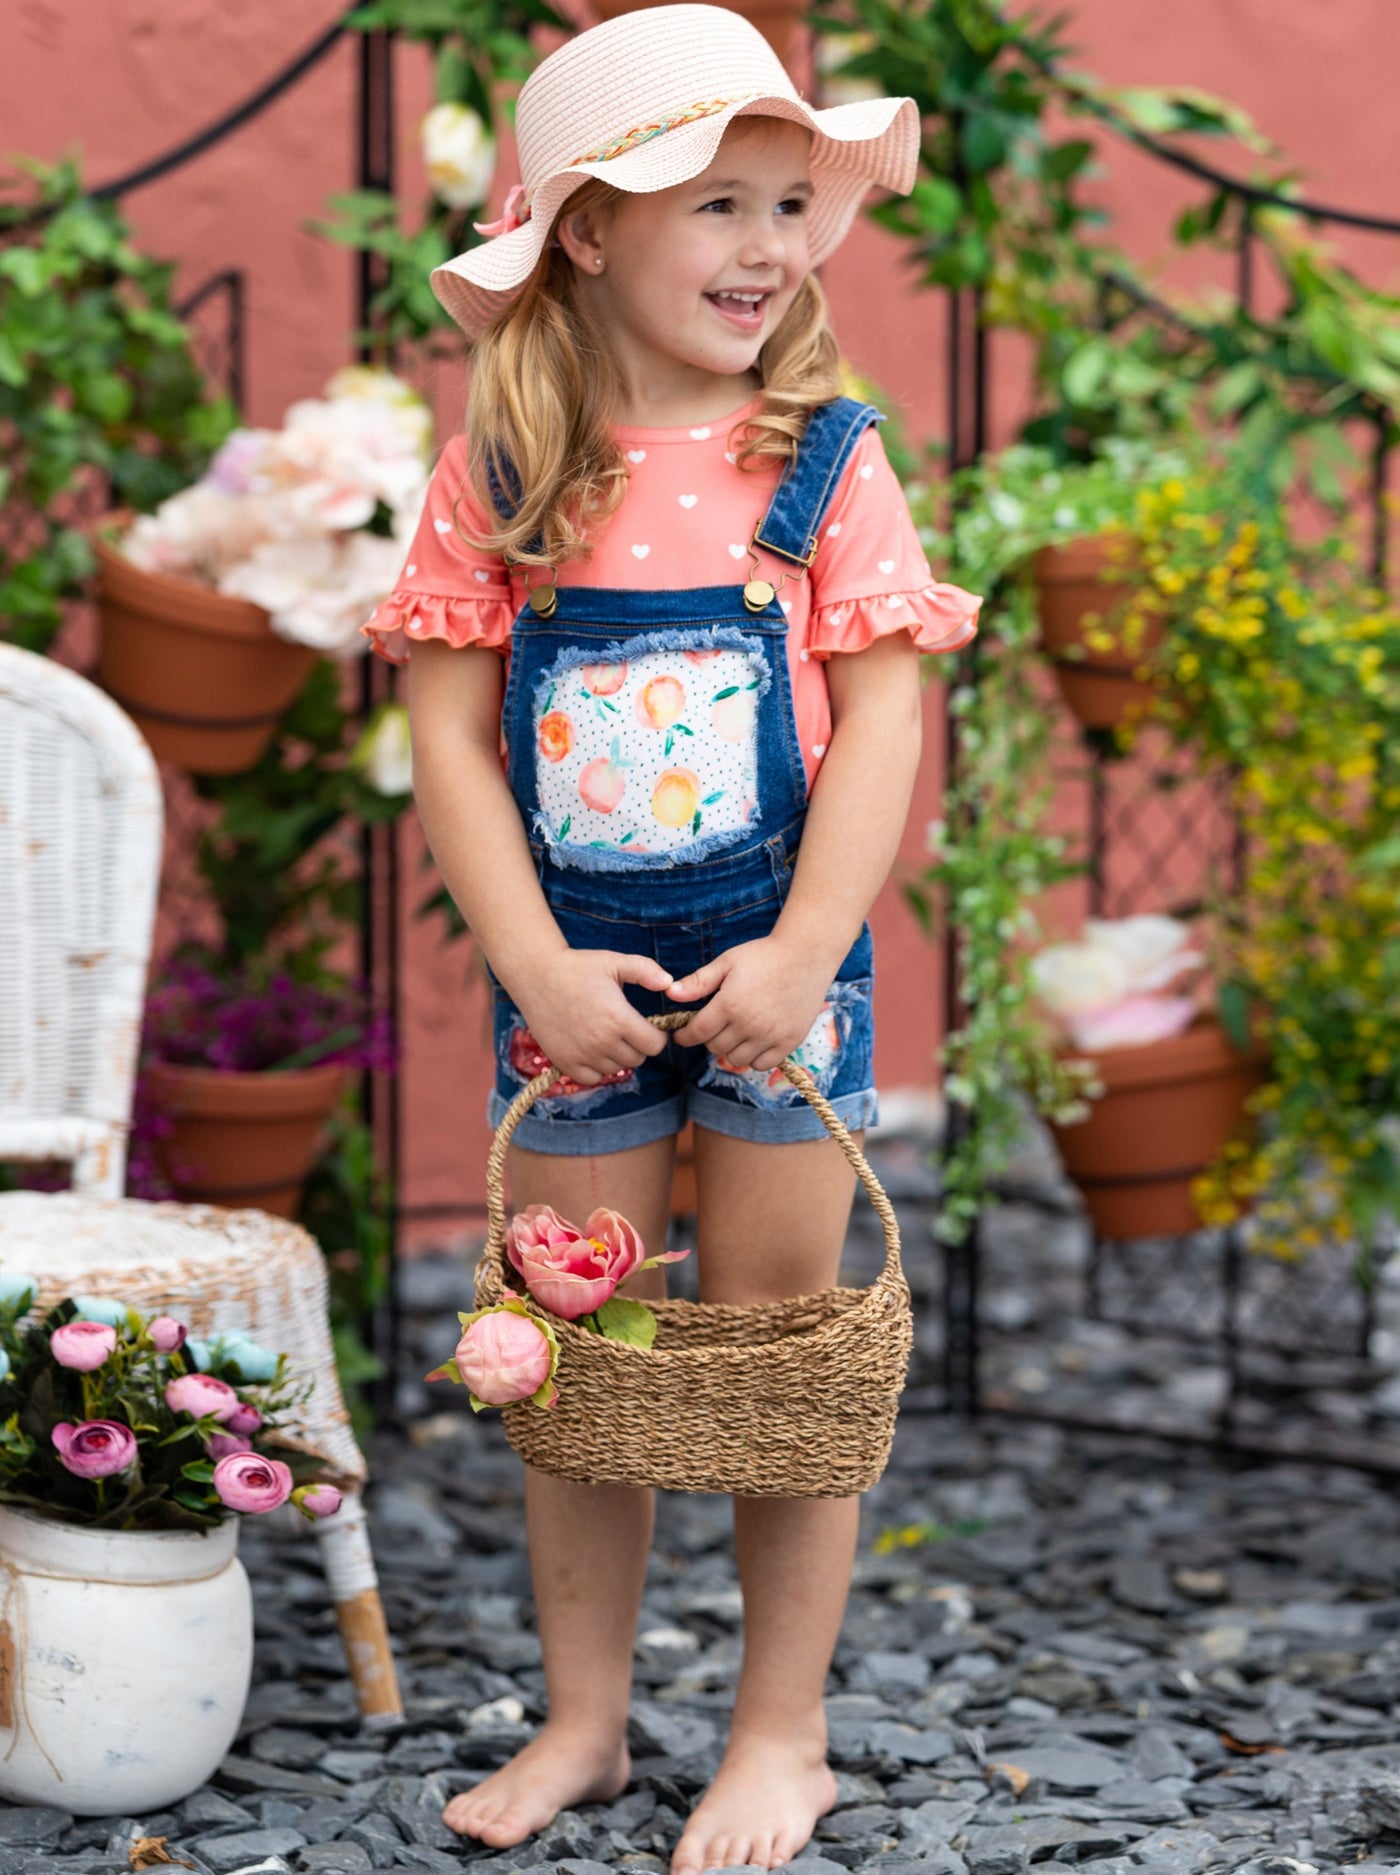 Spring Clothes | Girls Polka Dot Heart Top & Patched Overall Shorts